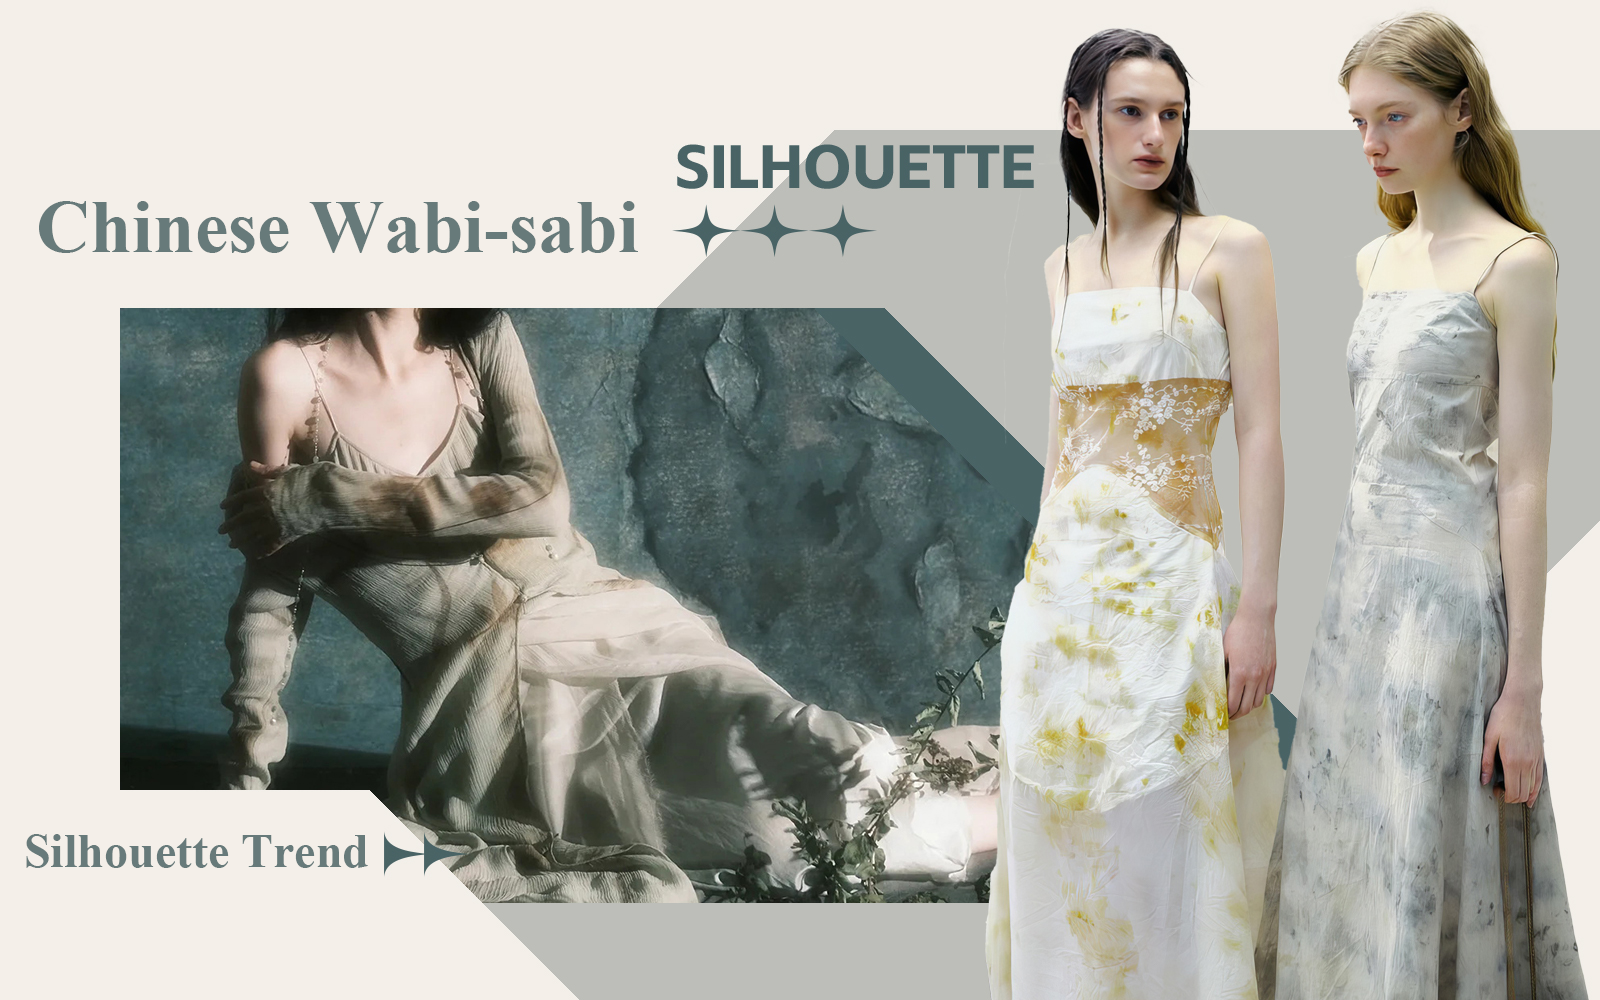 Chinese Wabi-sabi -- The Silhouette Trend for Women's Dress